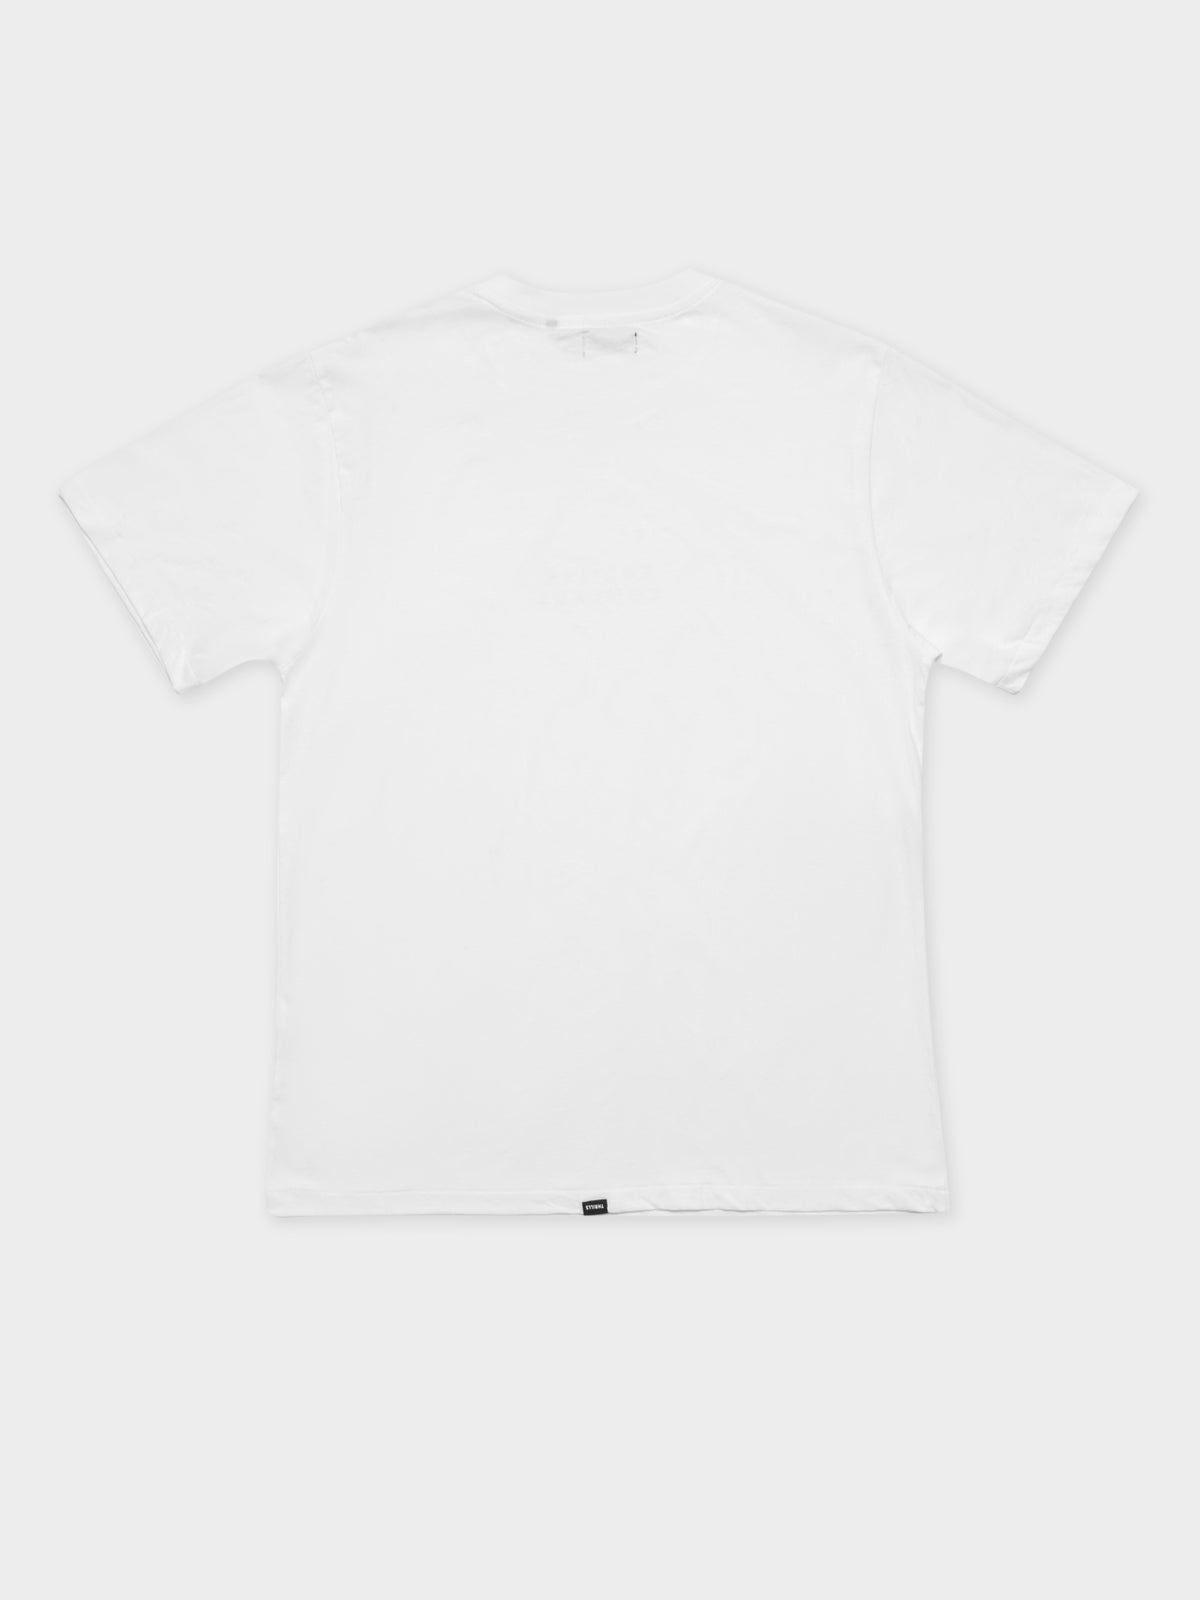 Palmed Thrills Company Merch Fit T-Shirt in White